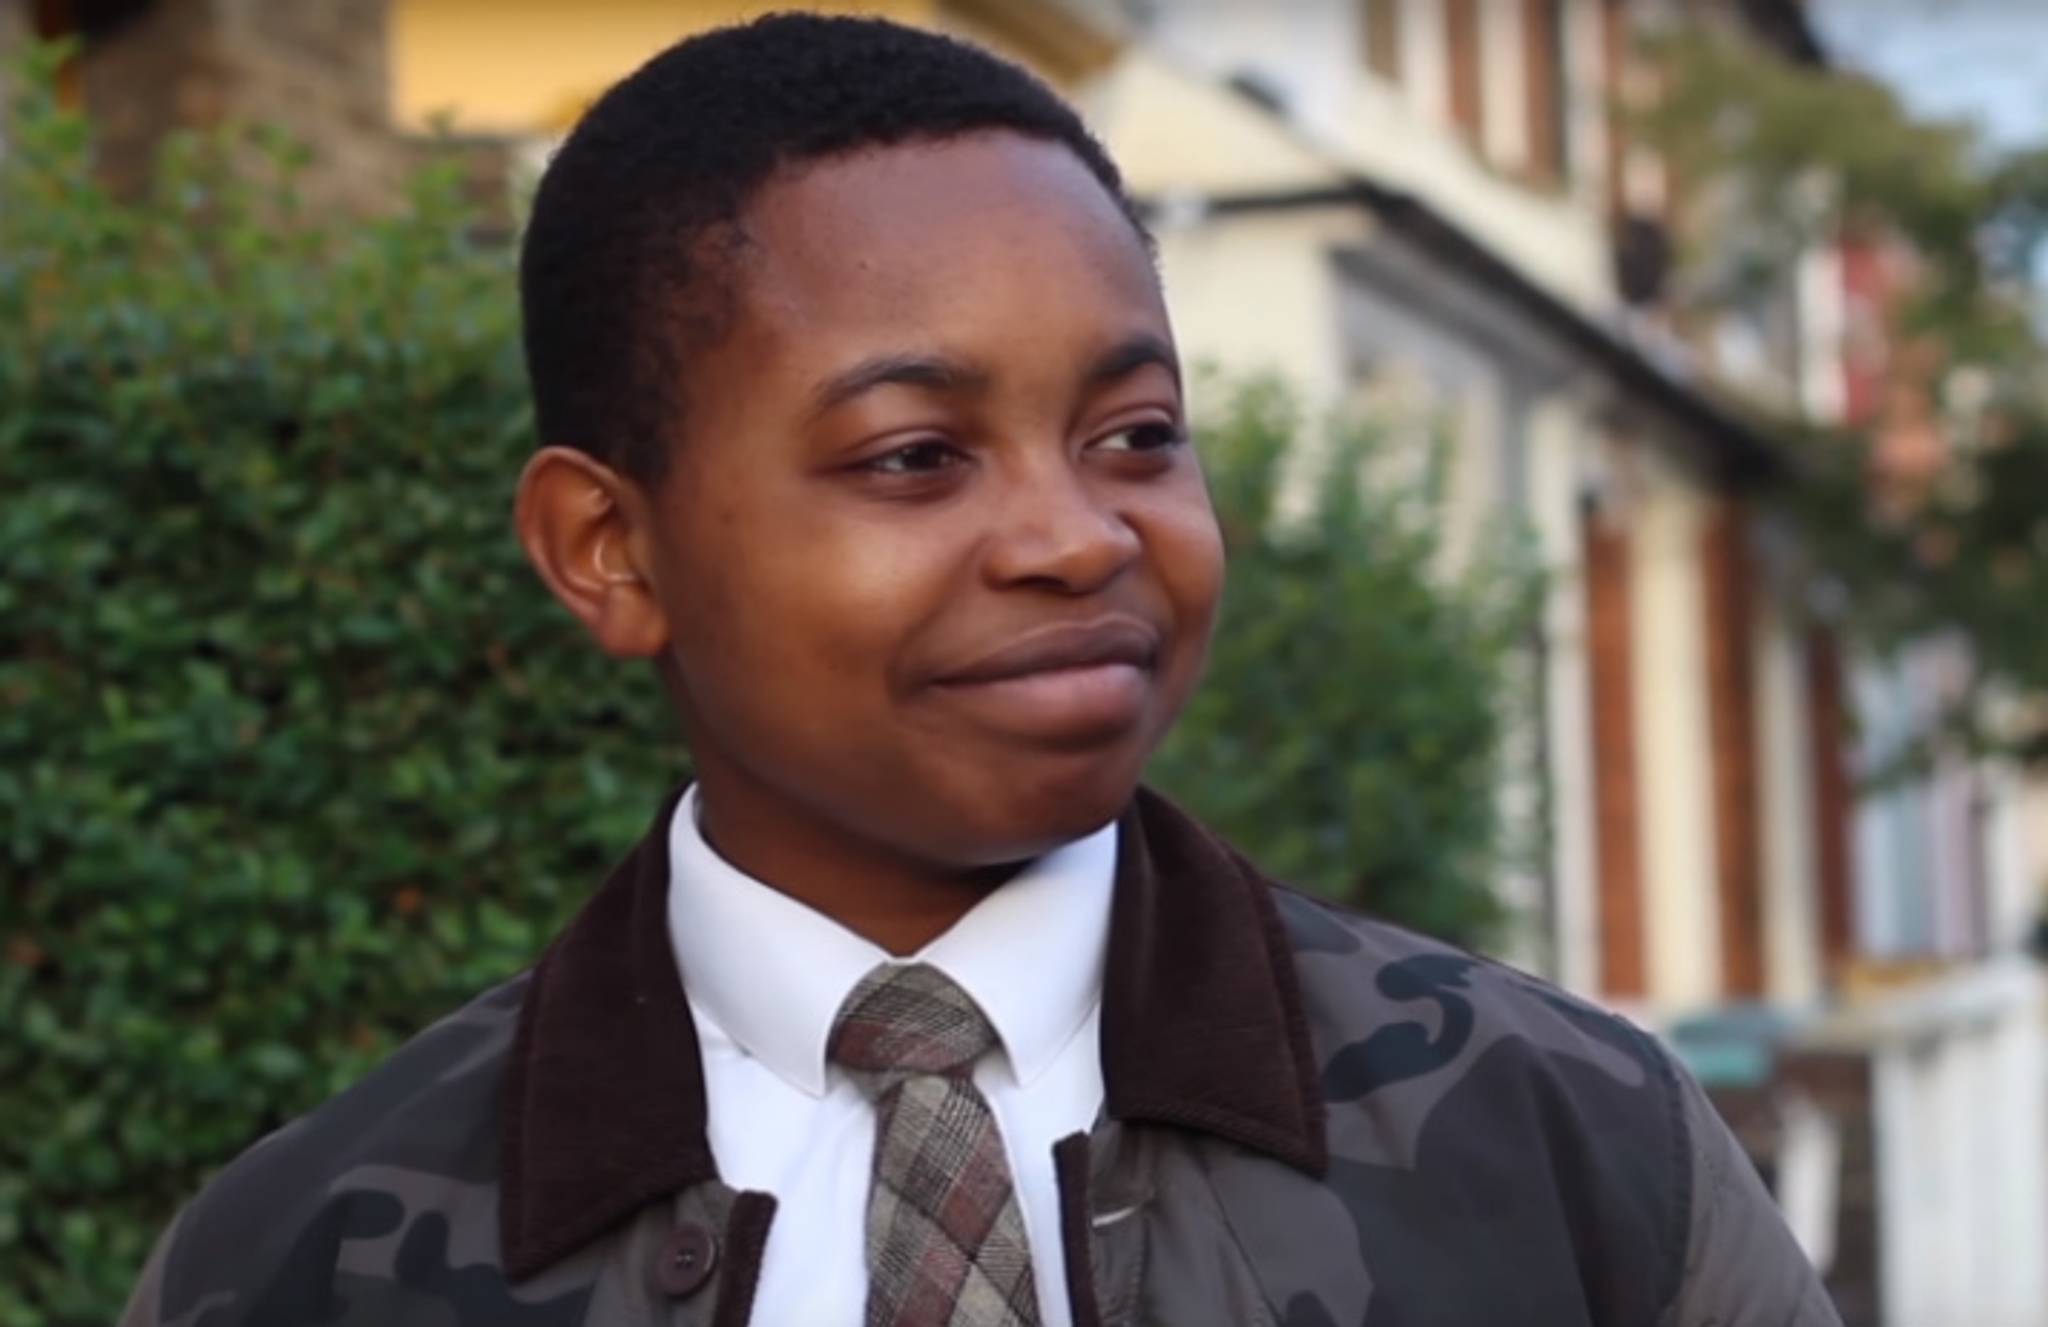 Chicken Connoisseur's fast food reviews have gone viral